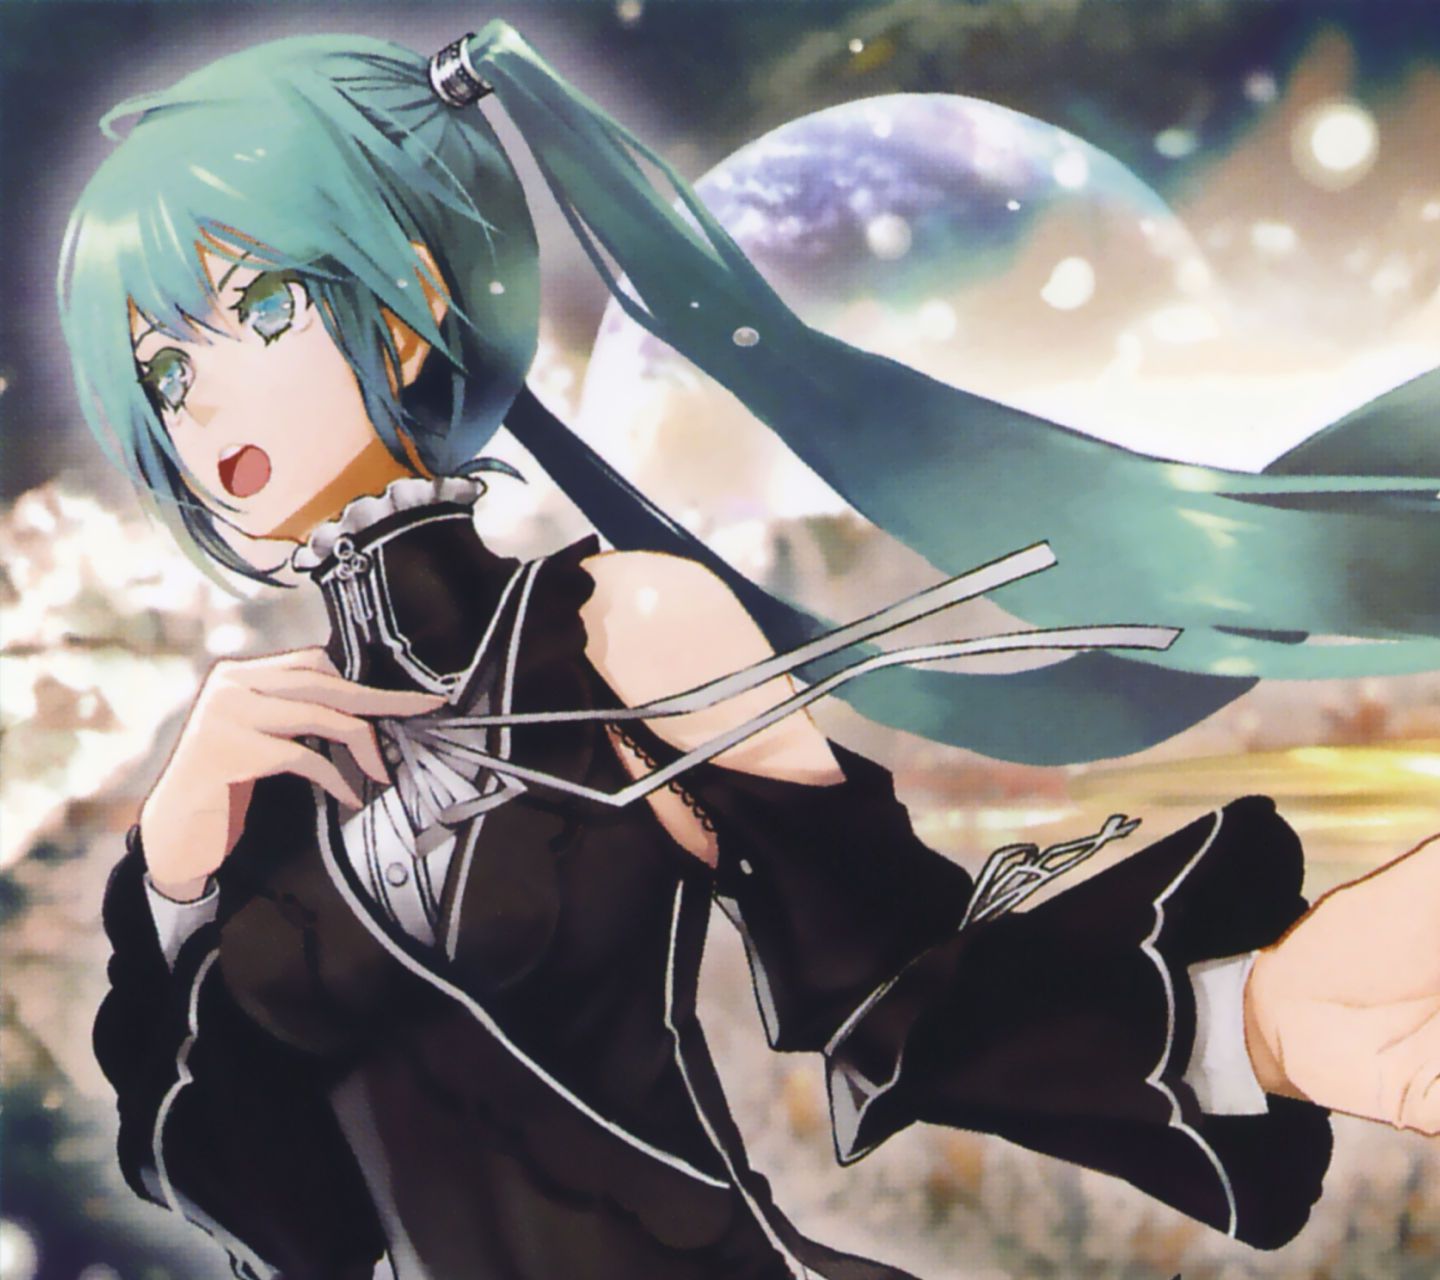 Vocaloid Android壁紙 4 初音ミク アニメ壁紙ネット Pc Android Iphone壁紙 画像